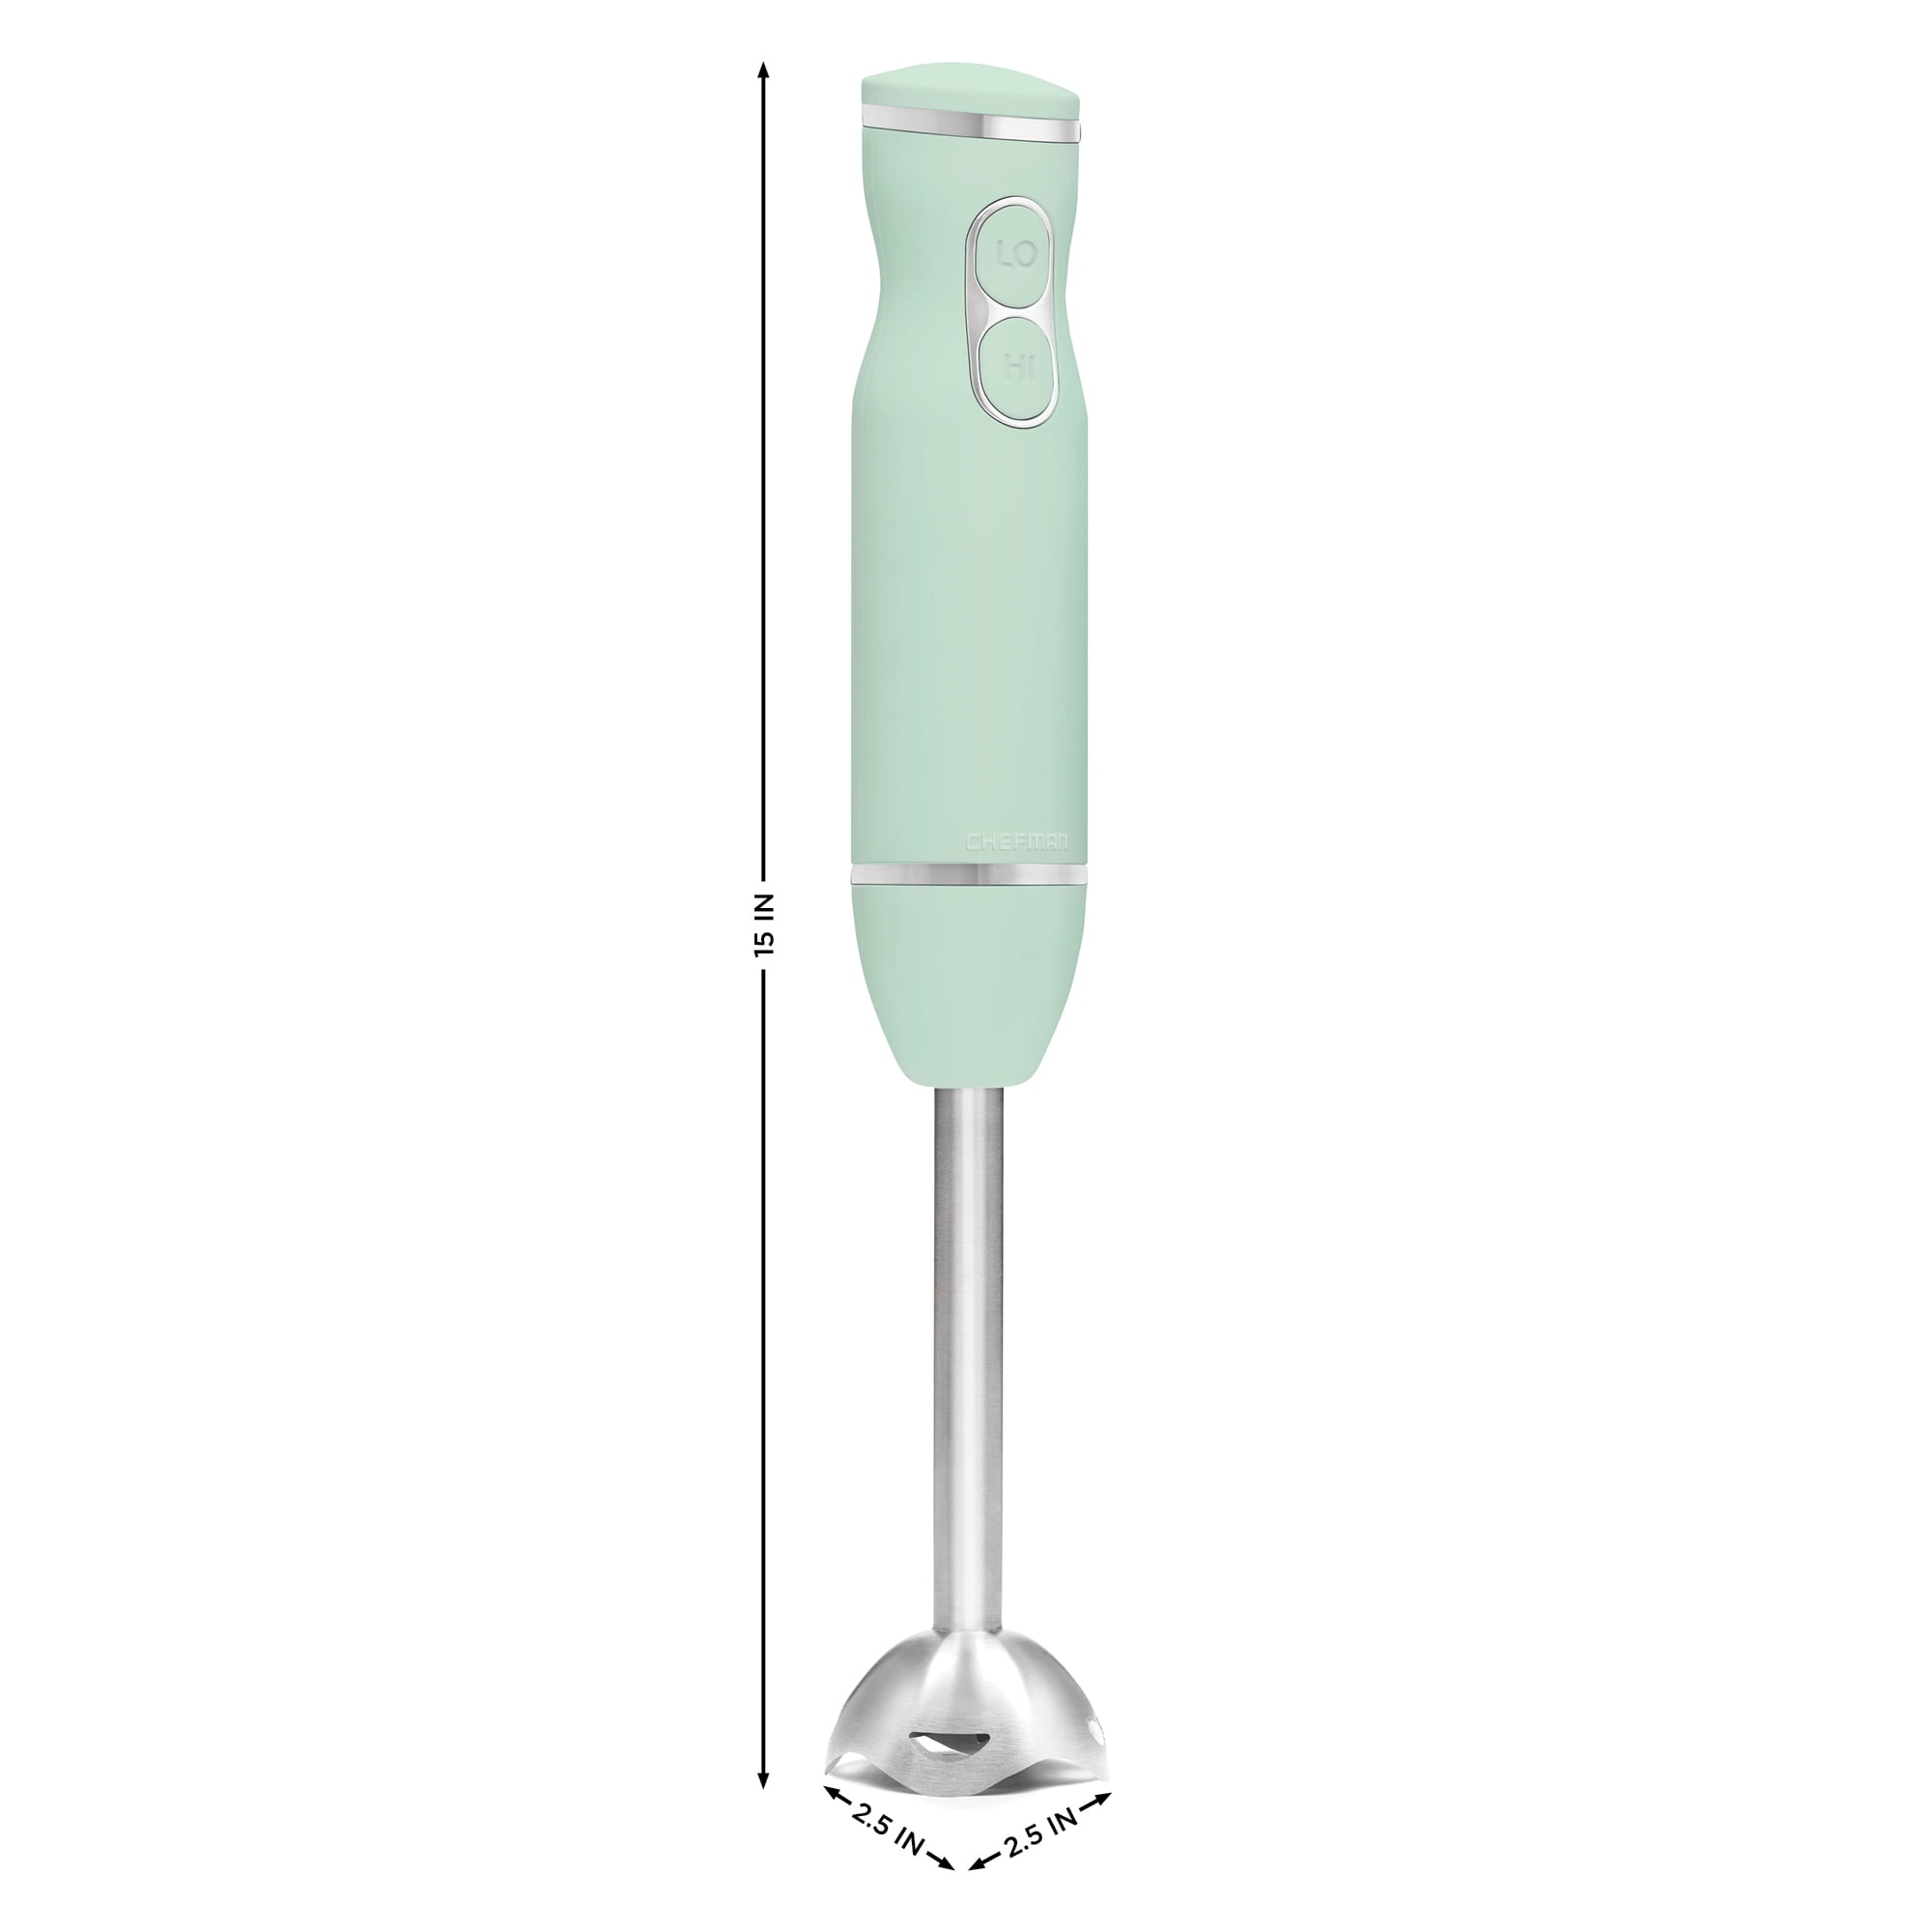 Chefman Immersion Blender, 2-speed, Turquoise, Stainless Steel Blades, 300W  RJ19-V3-RBR-TURQ-C - The Home Depot